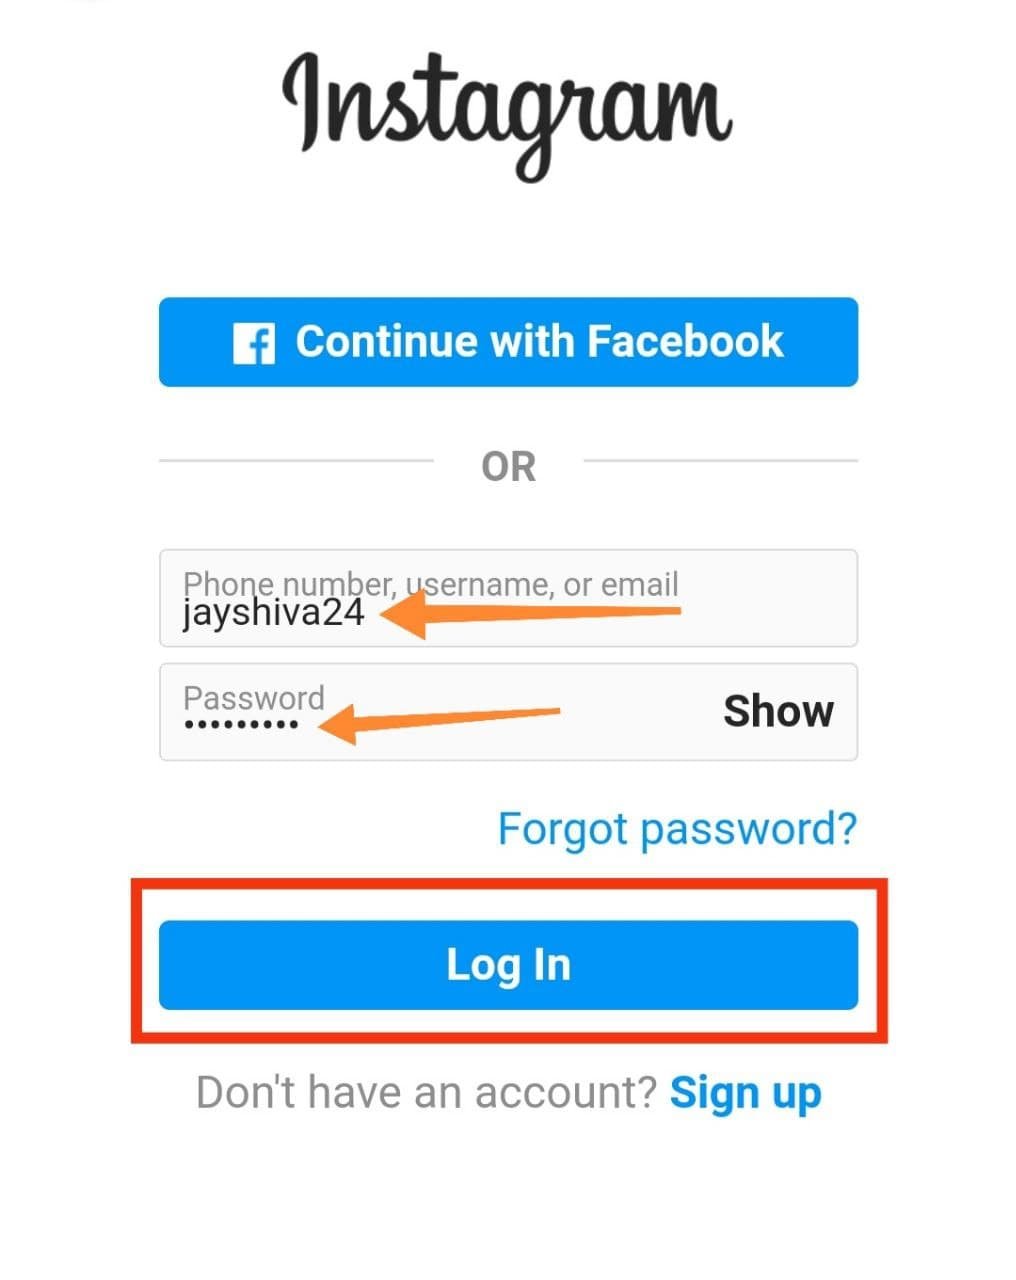 Login By Using Username and Password